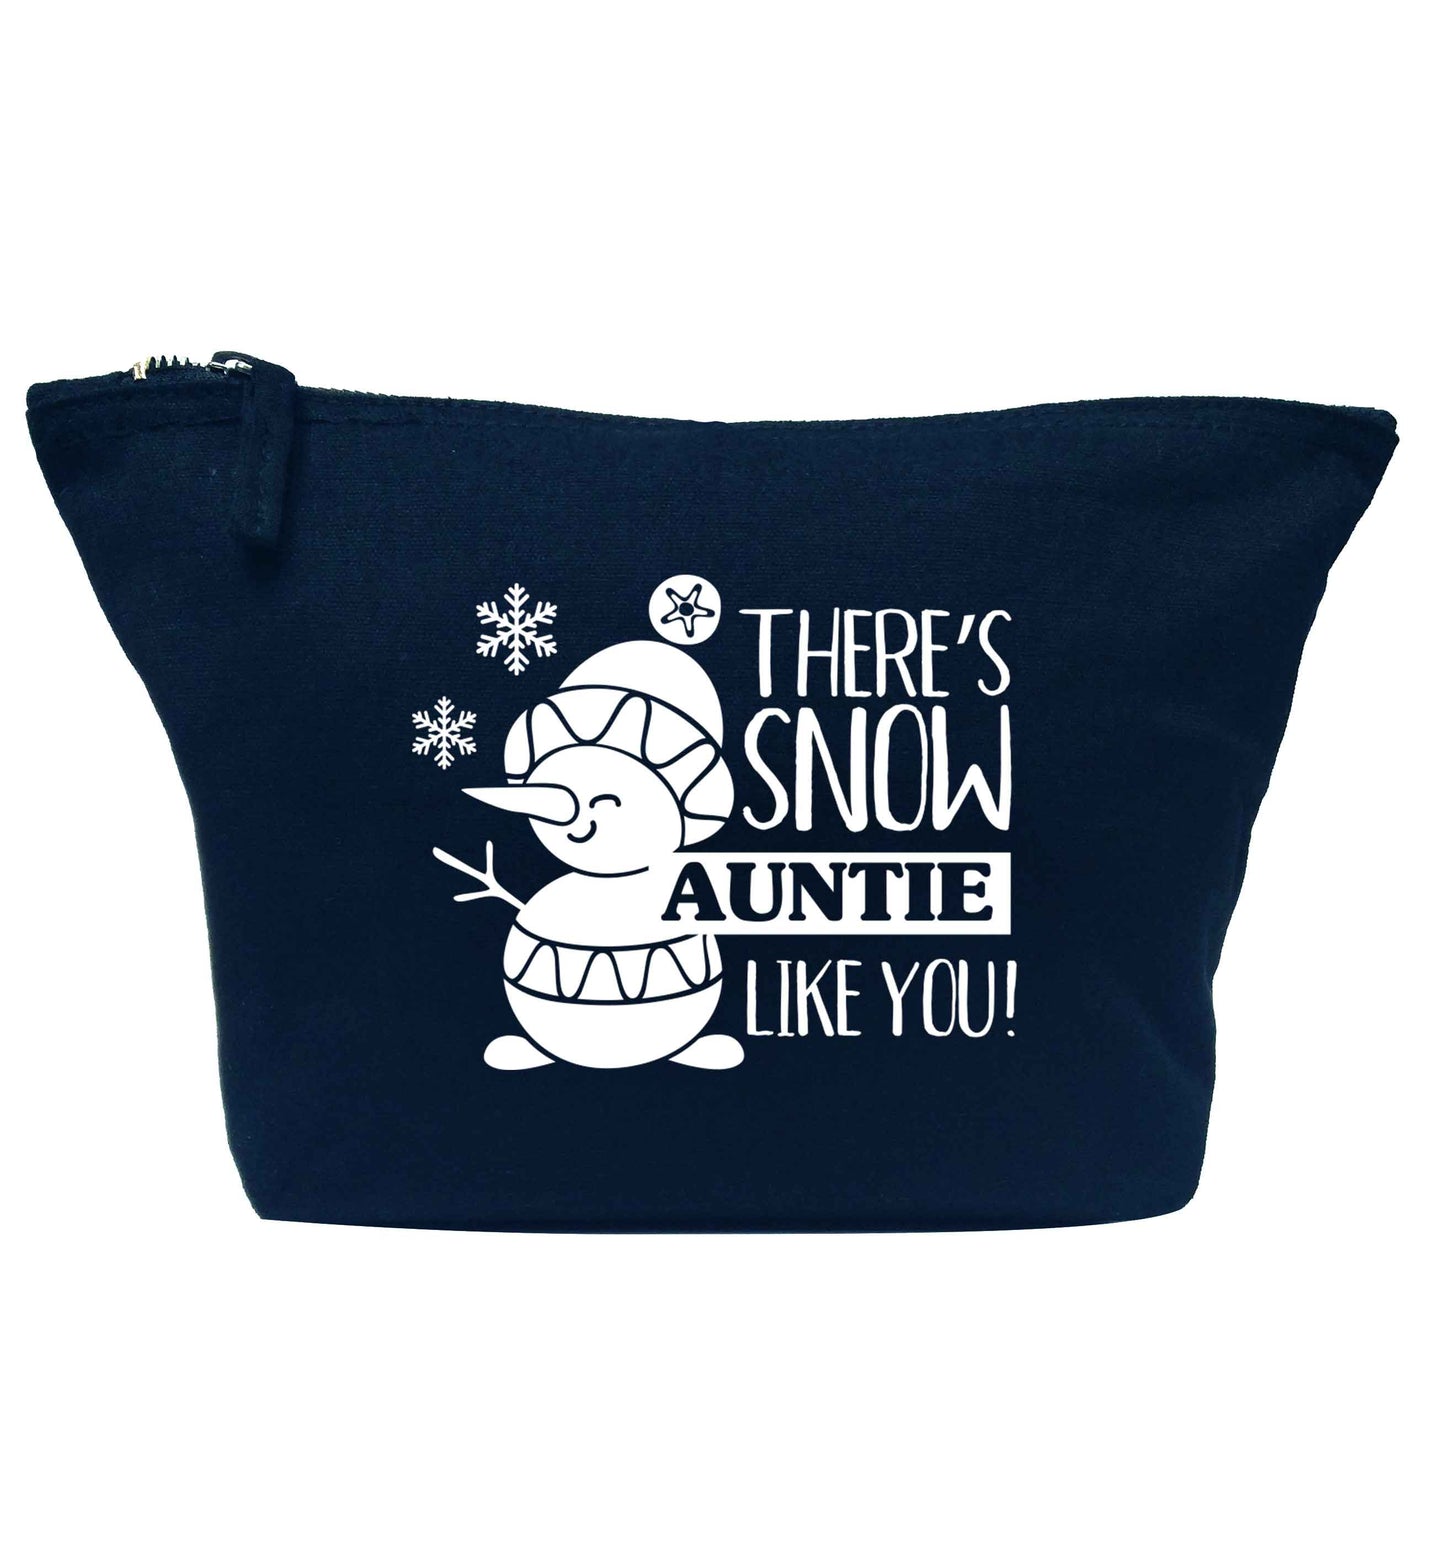 There's snow auntie like you navy makeup bag